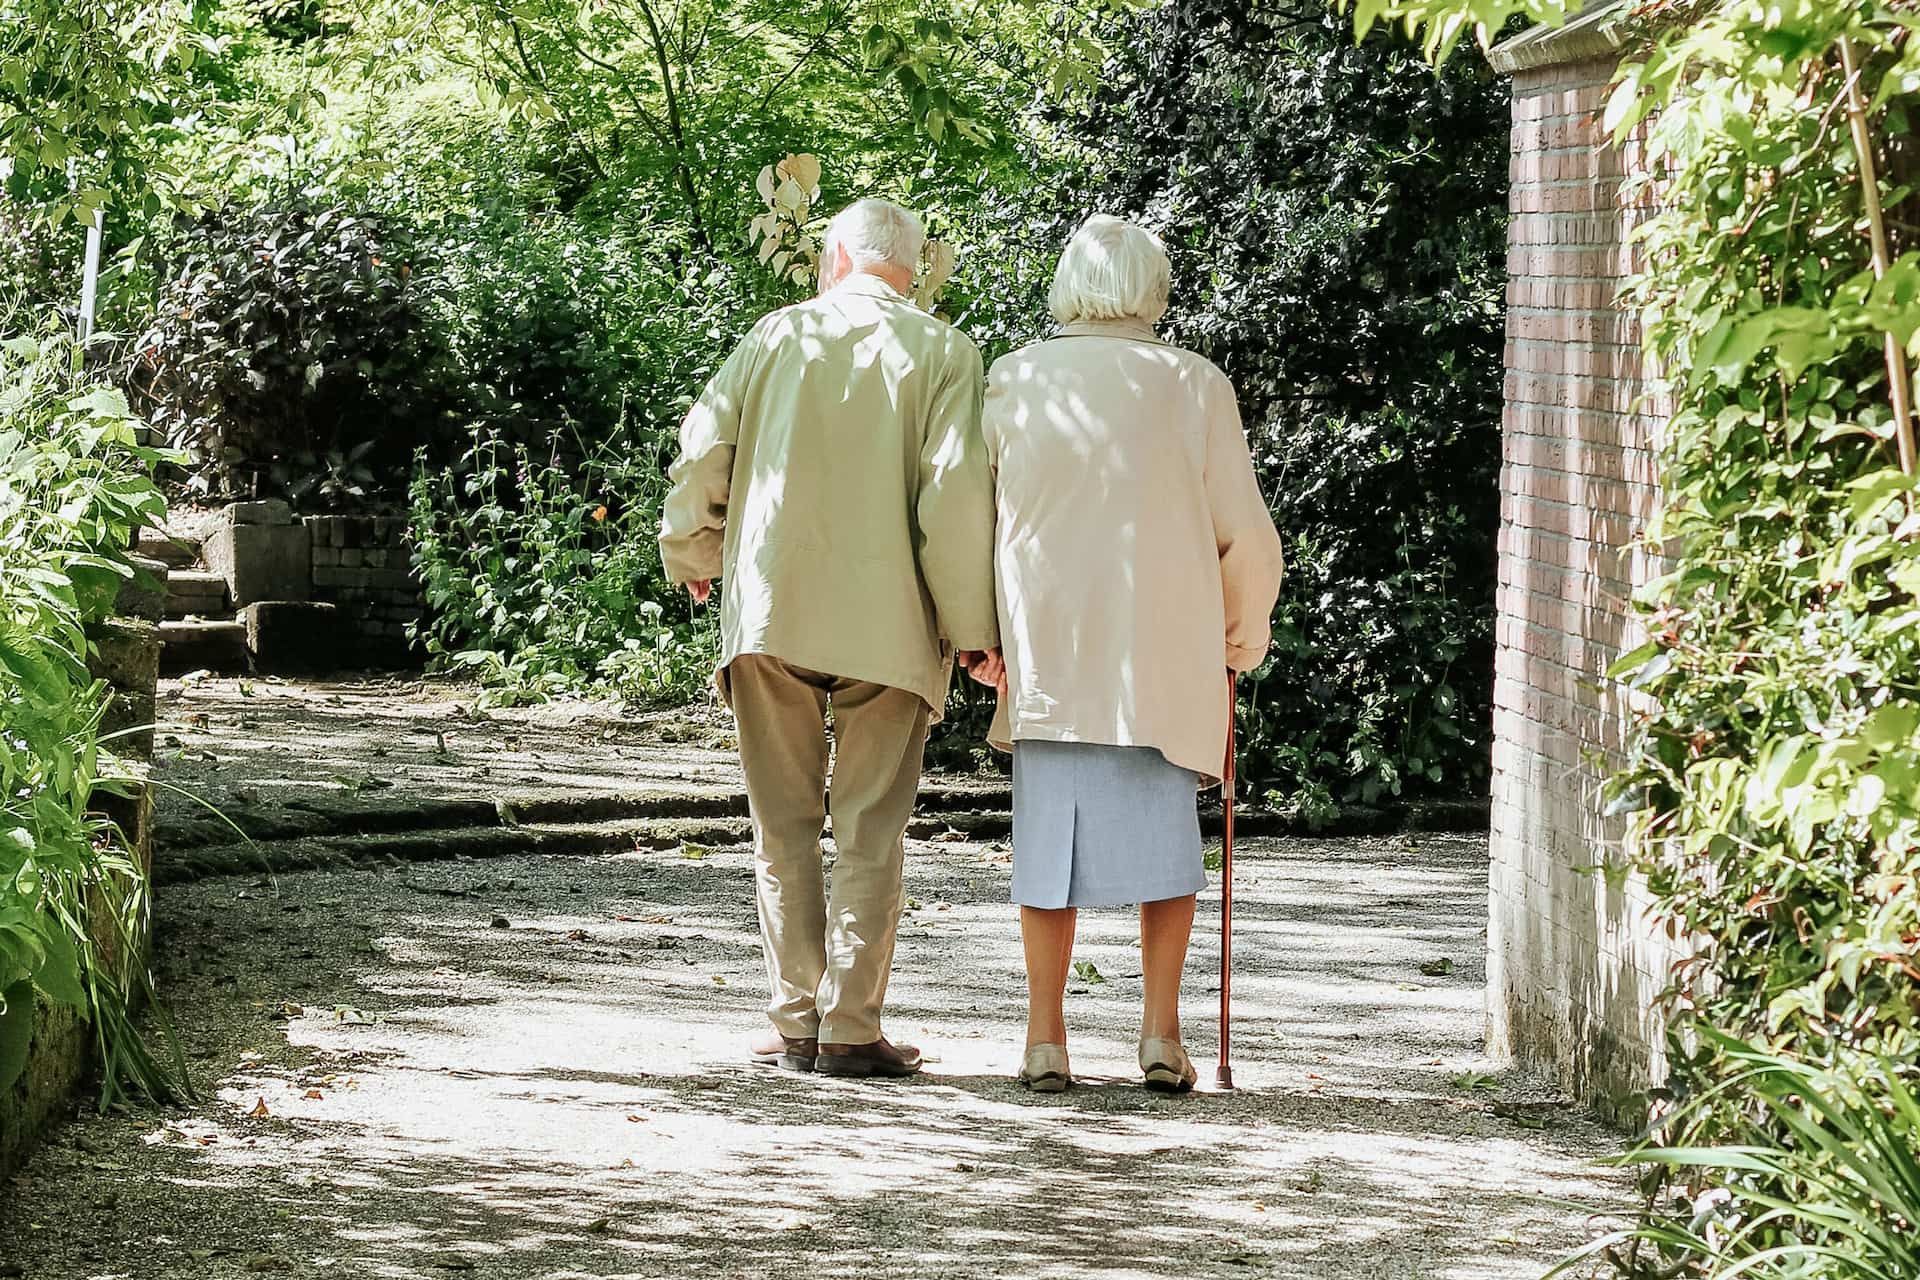 Seen from behind, two elderly people walk down a lane